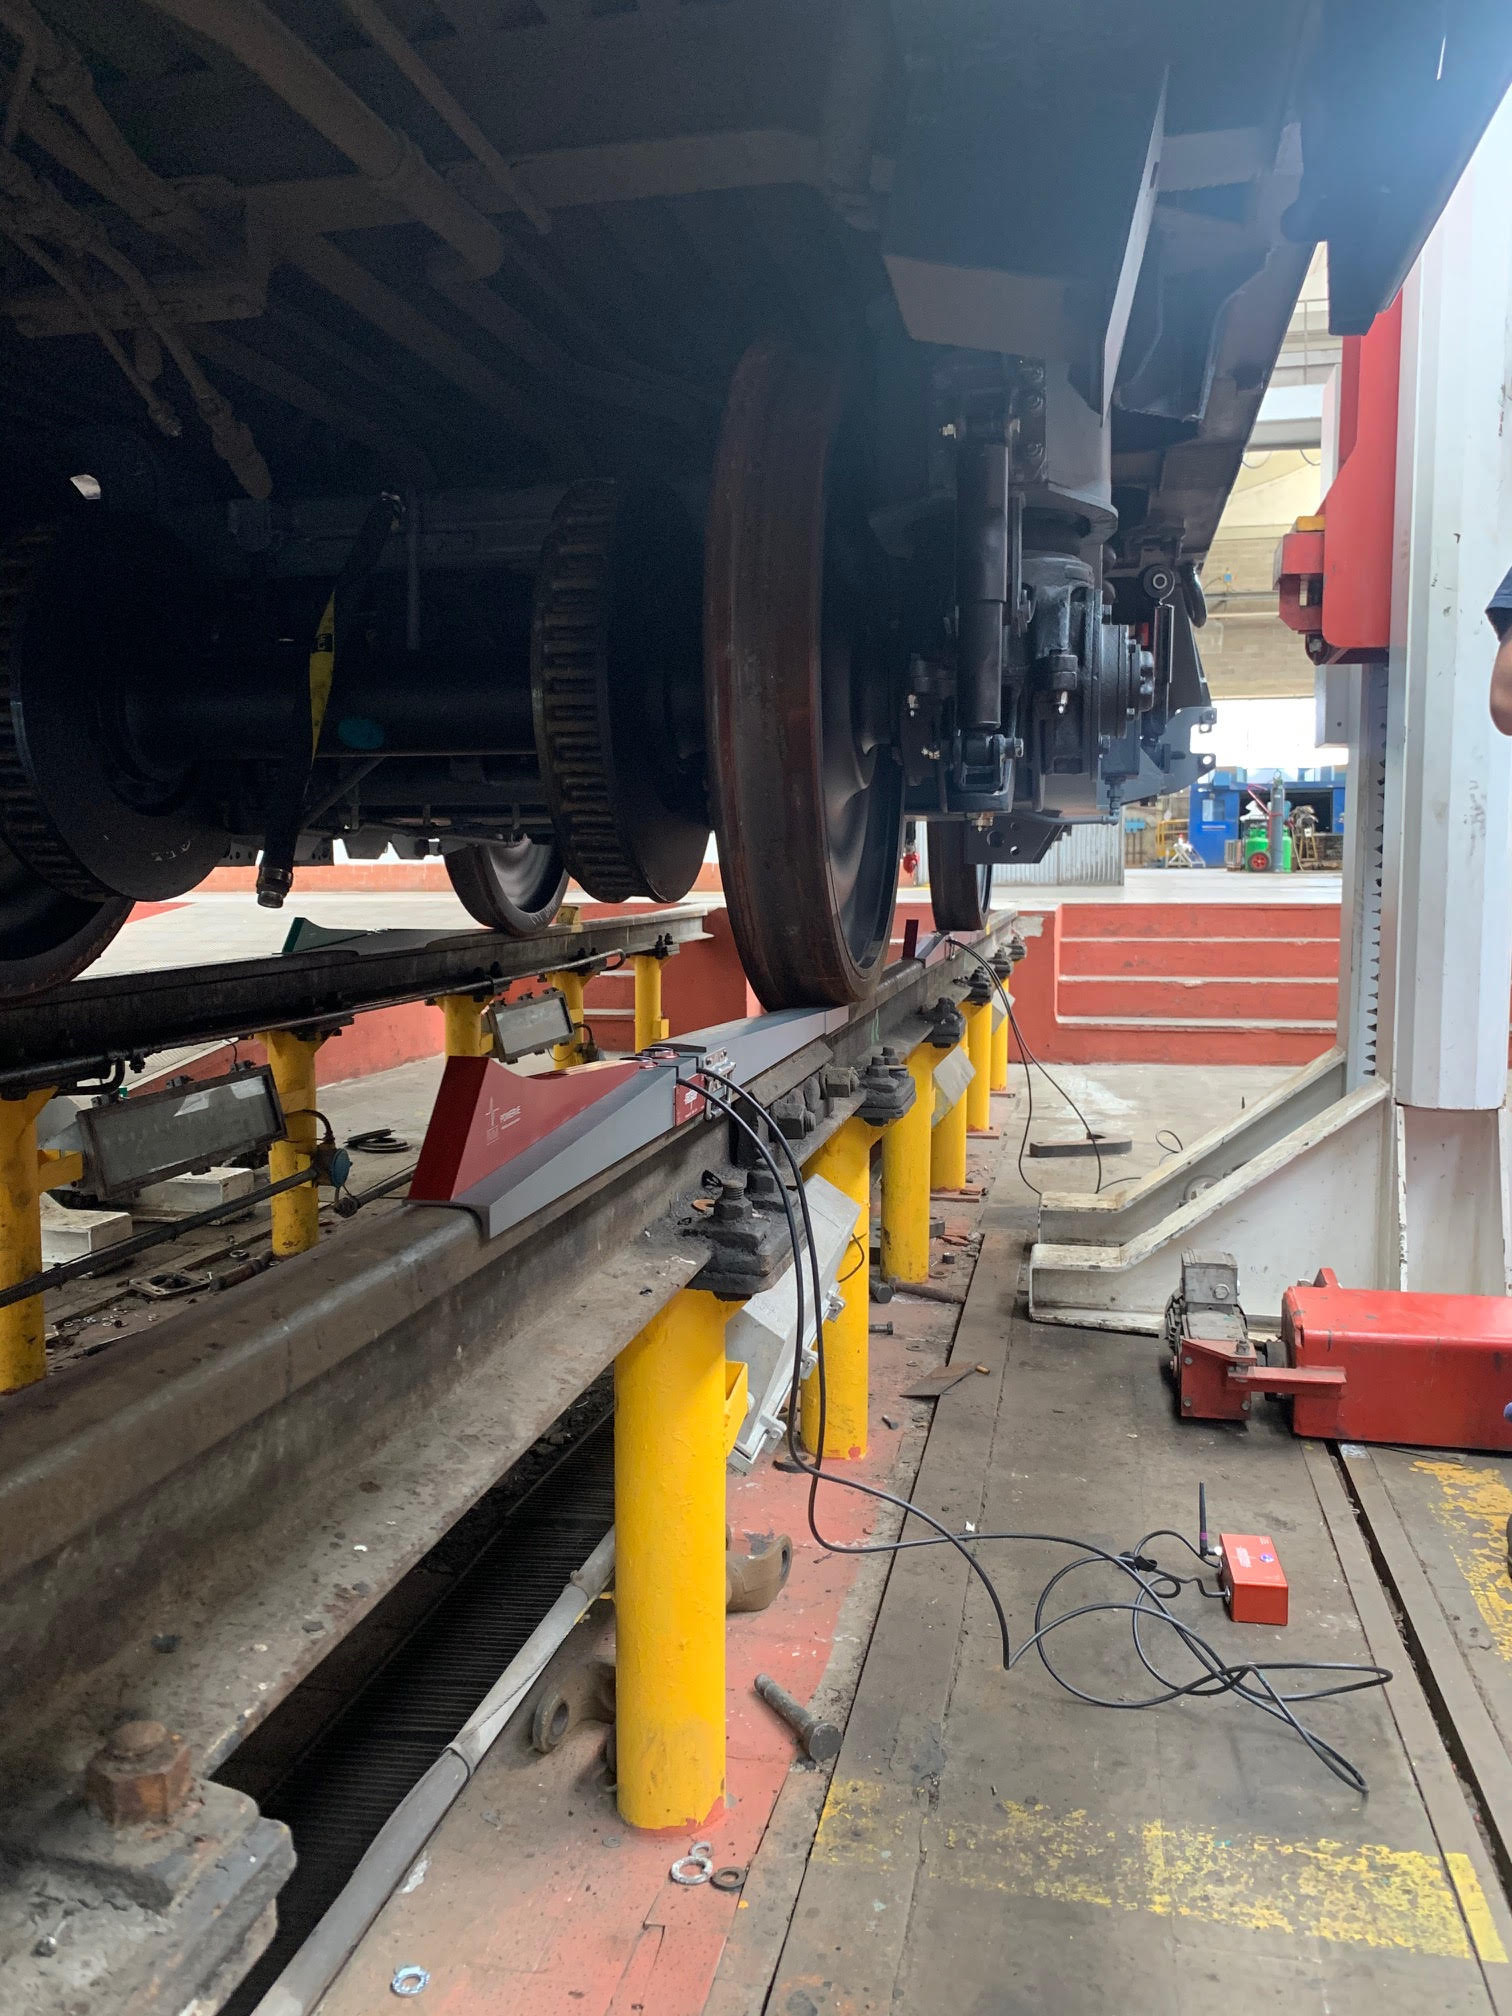 Railcars weigh system